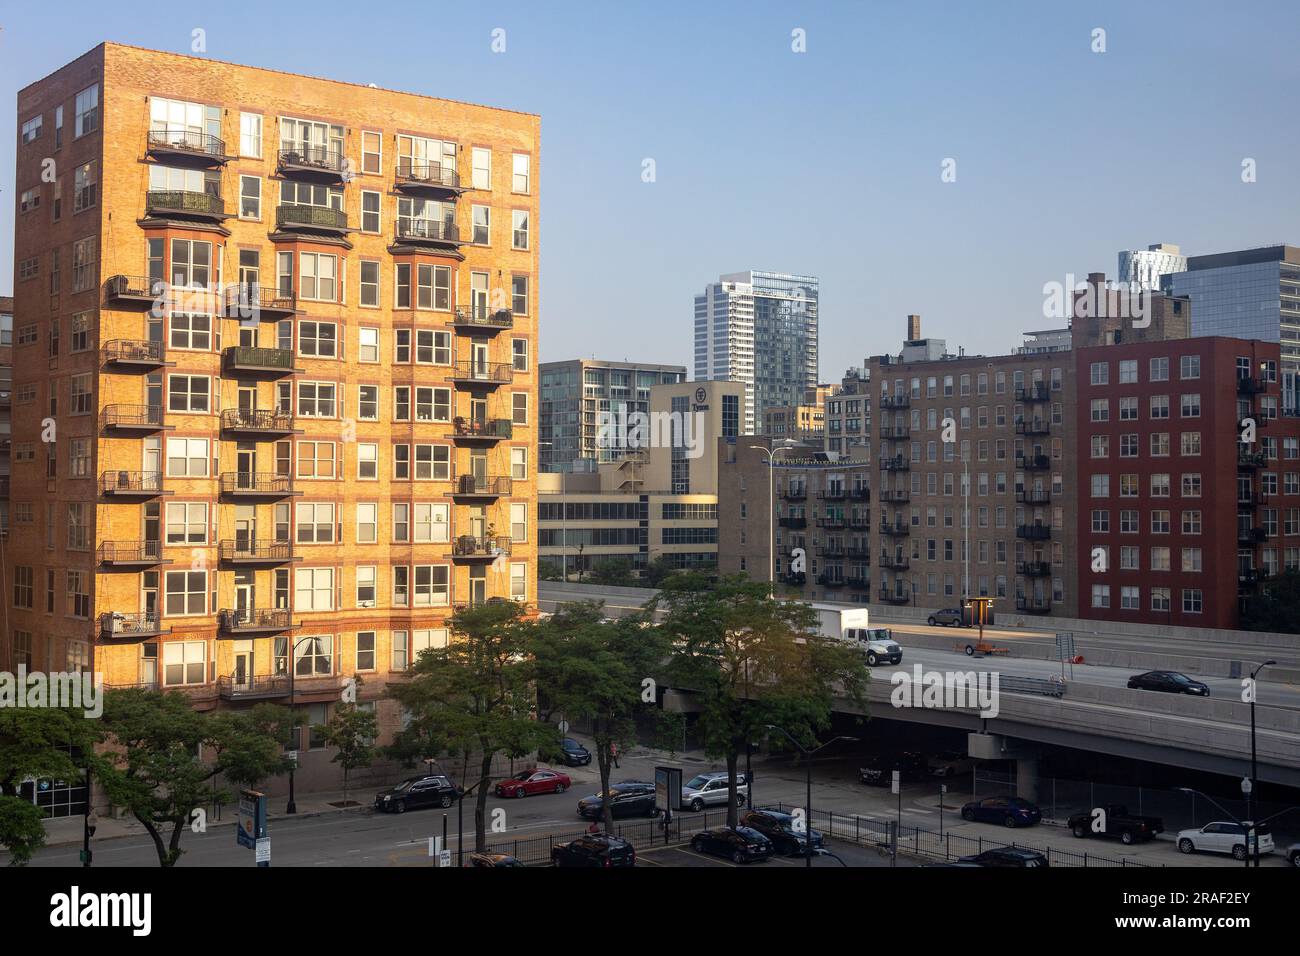 Older Chicago Apartment Buildings In The Clinton Area Of Chicago By The Interstate 290 Highway. Chicago USA Stock Photo